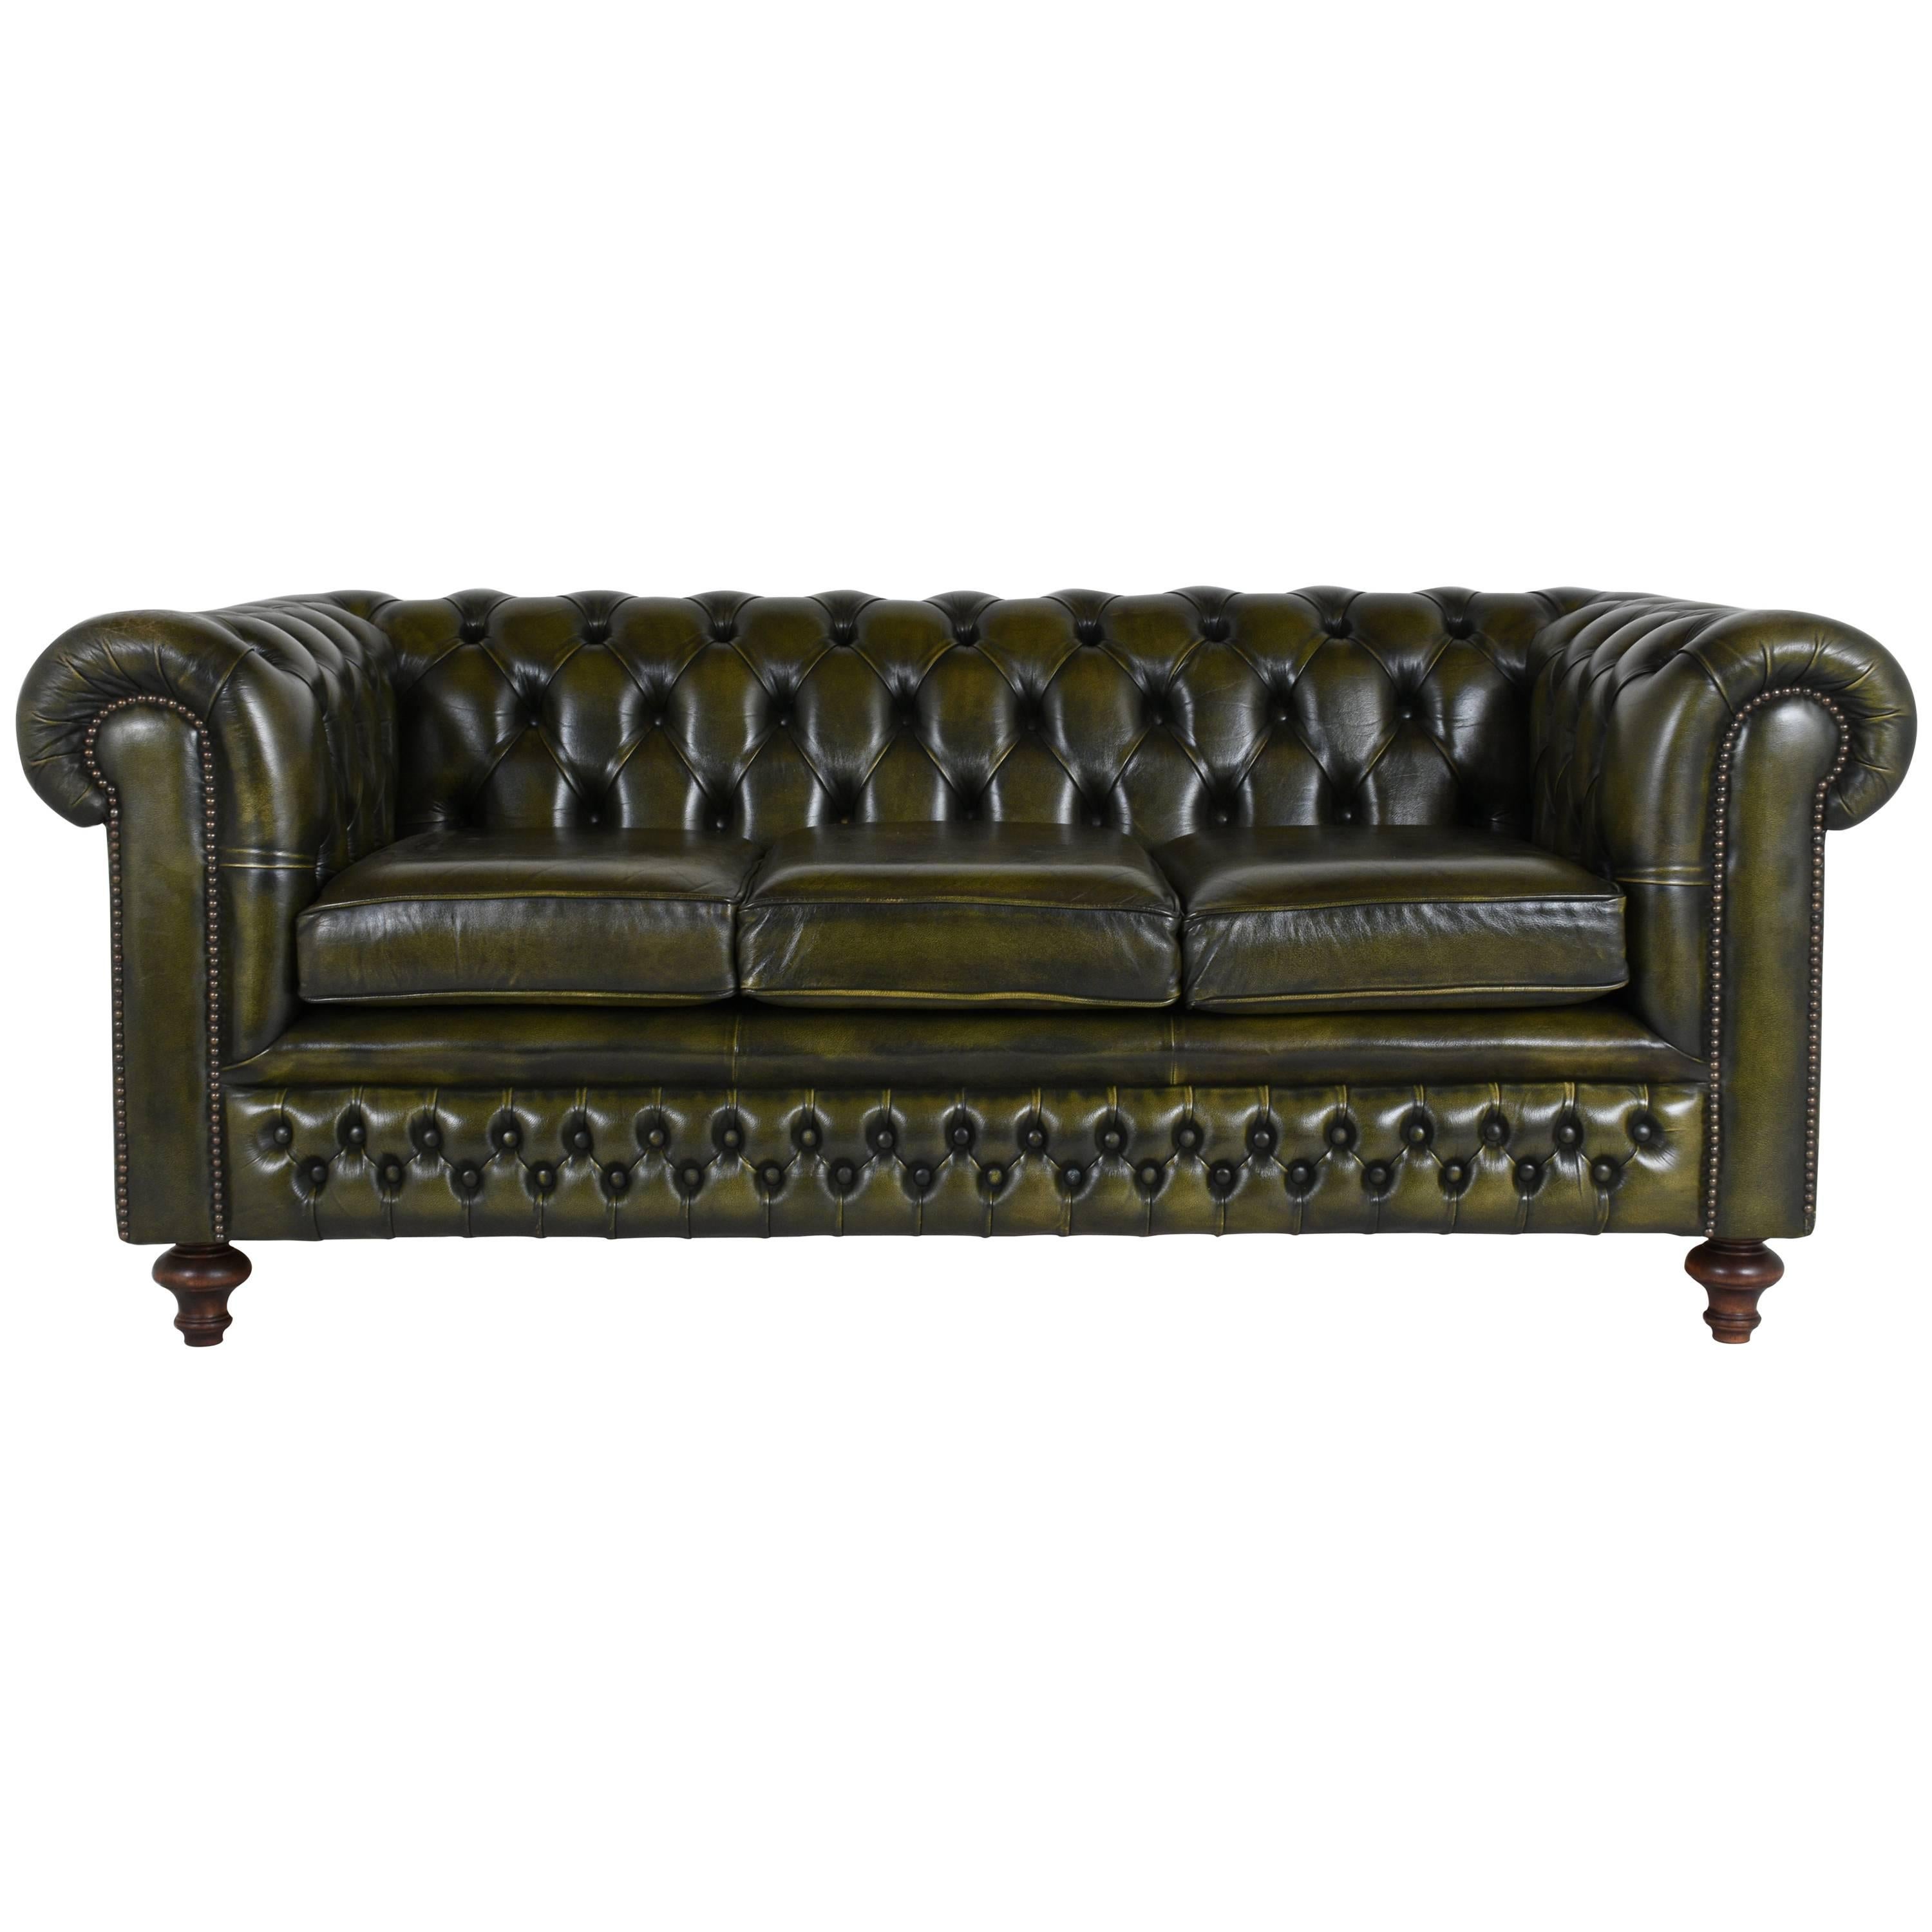 Vintage Chesterfield-Style Sofa